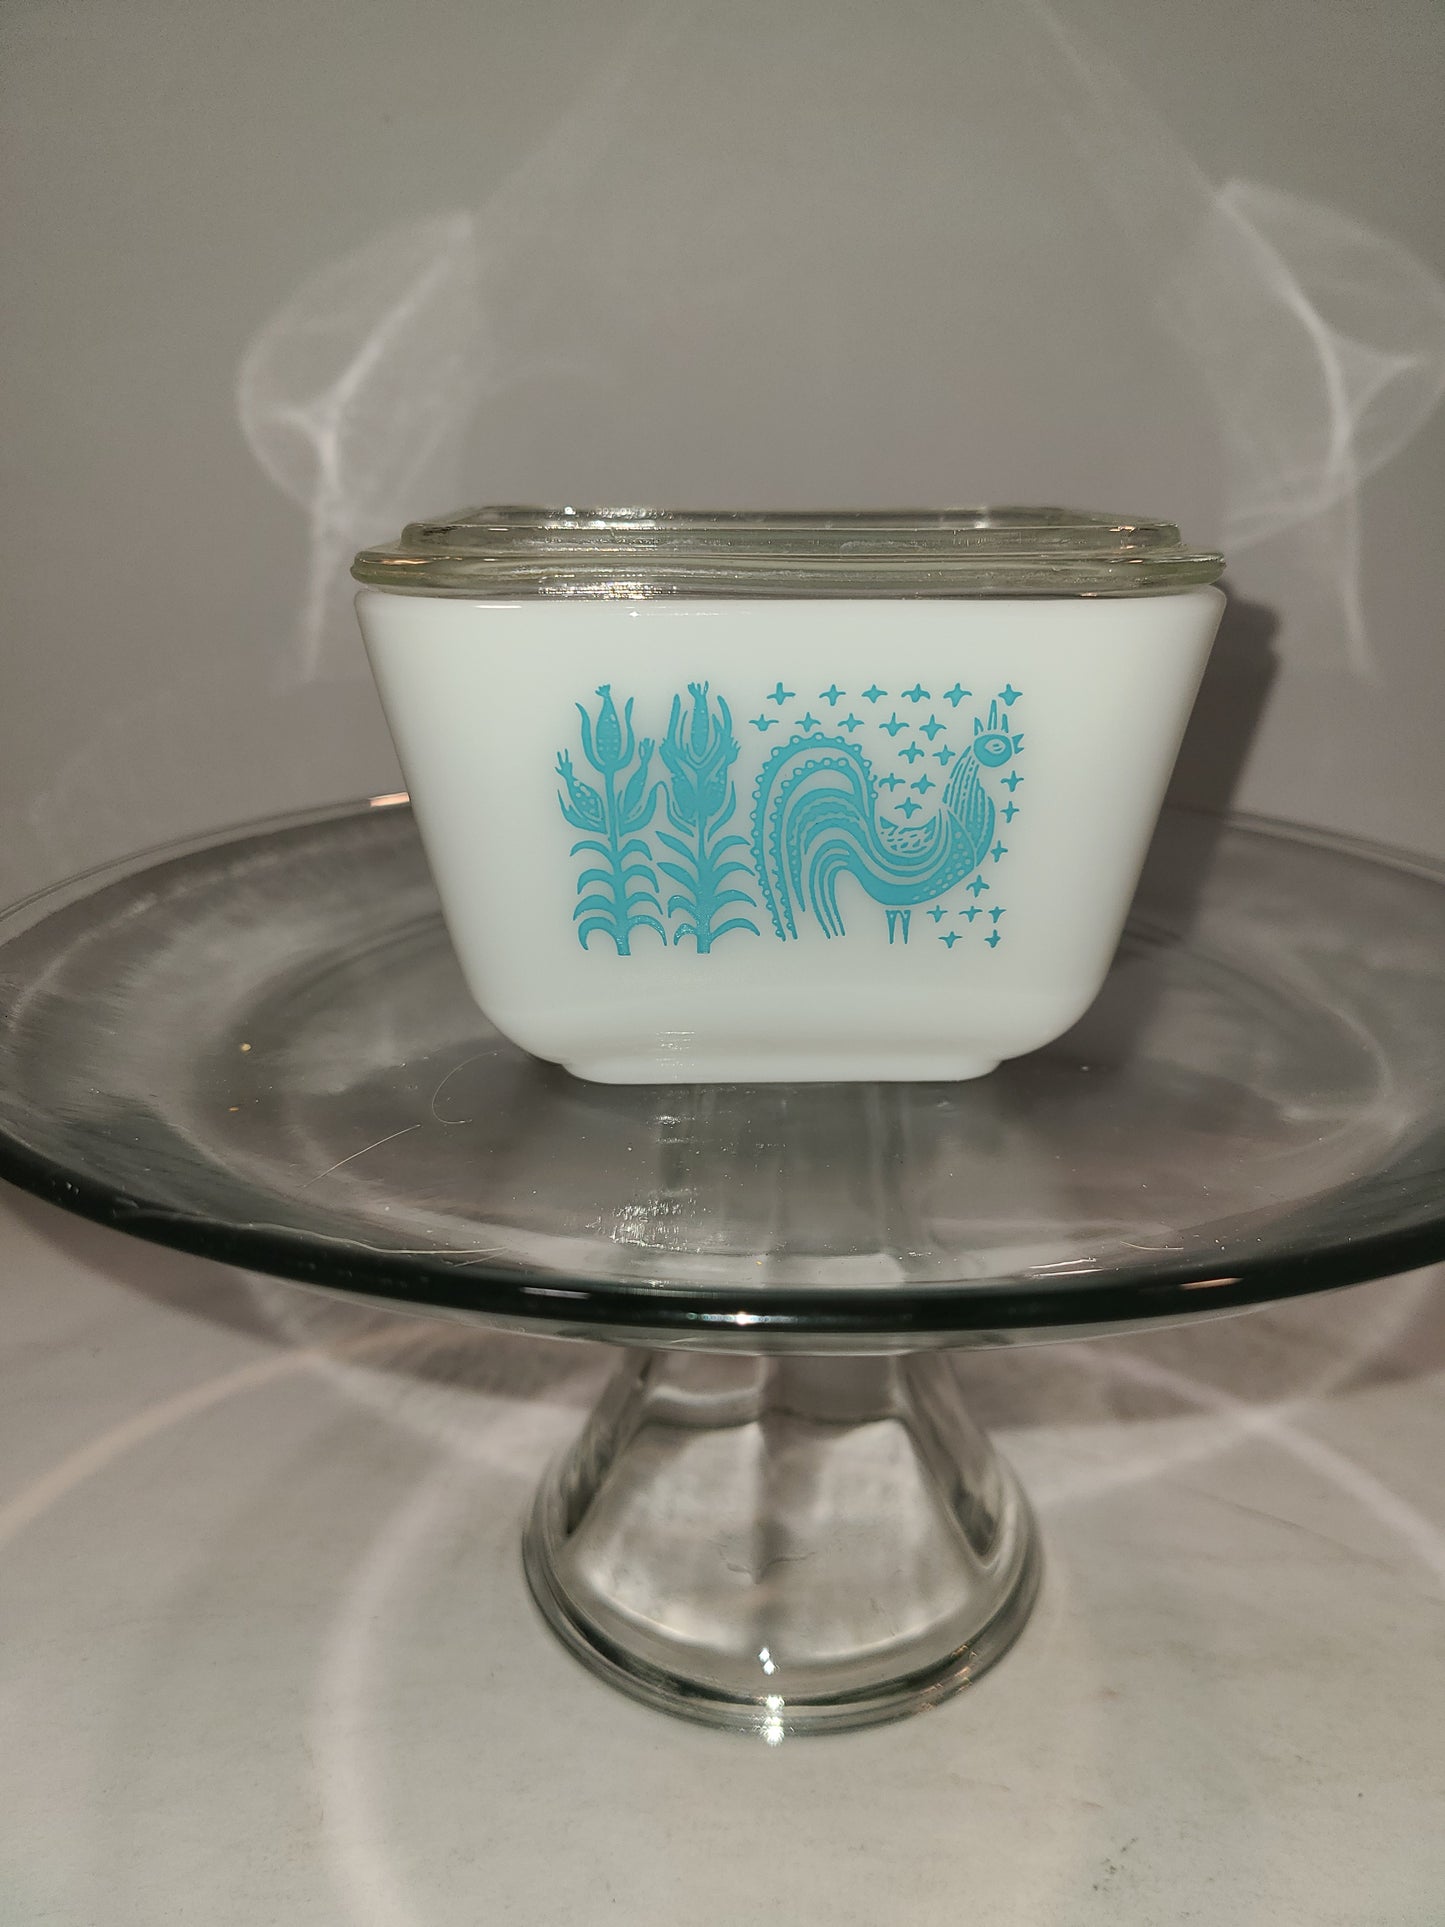 Pyrex Amish Butterprint refrigerator dishes